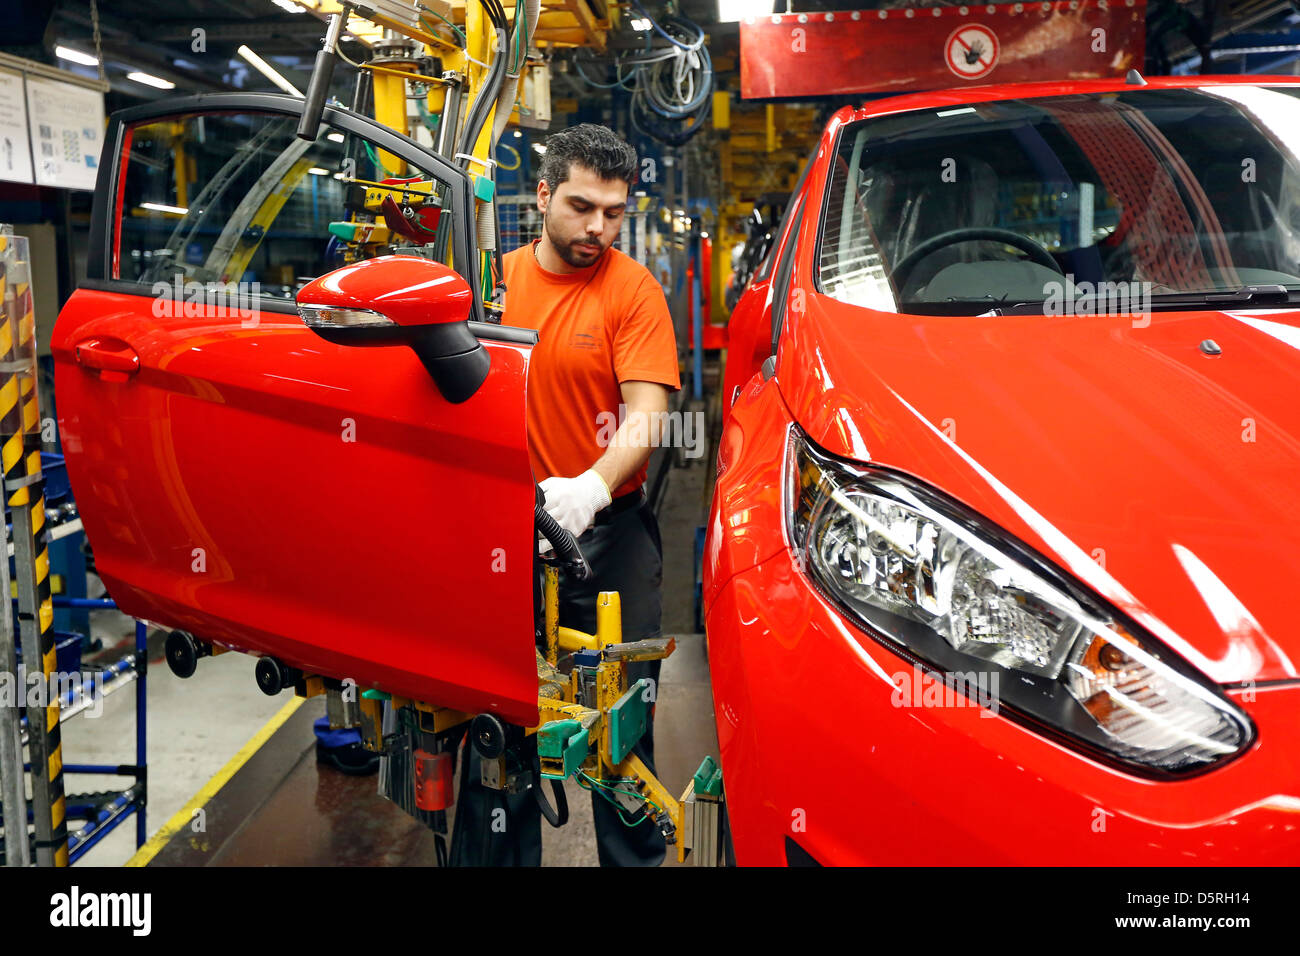 Ford manufacturing plants in germany #2